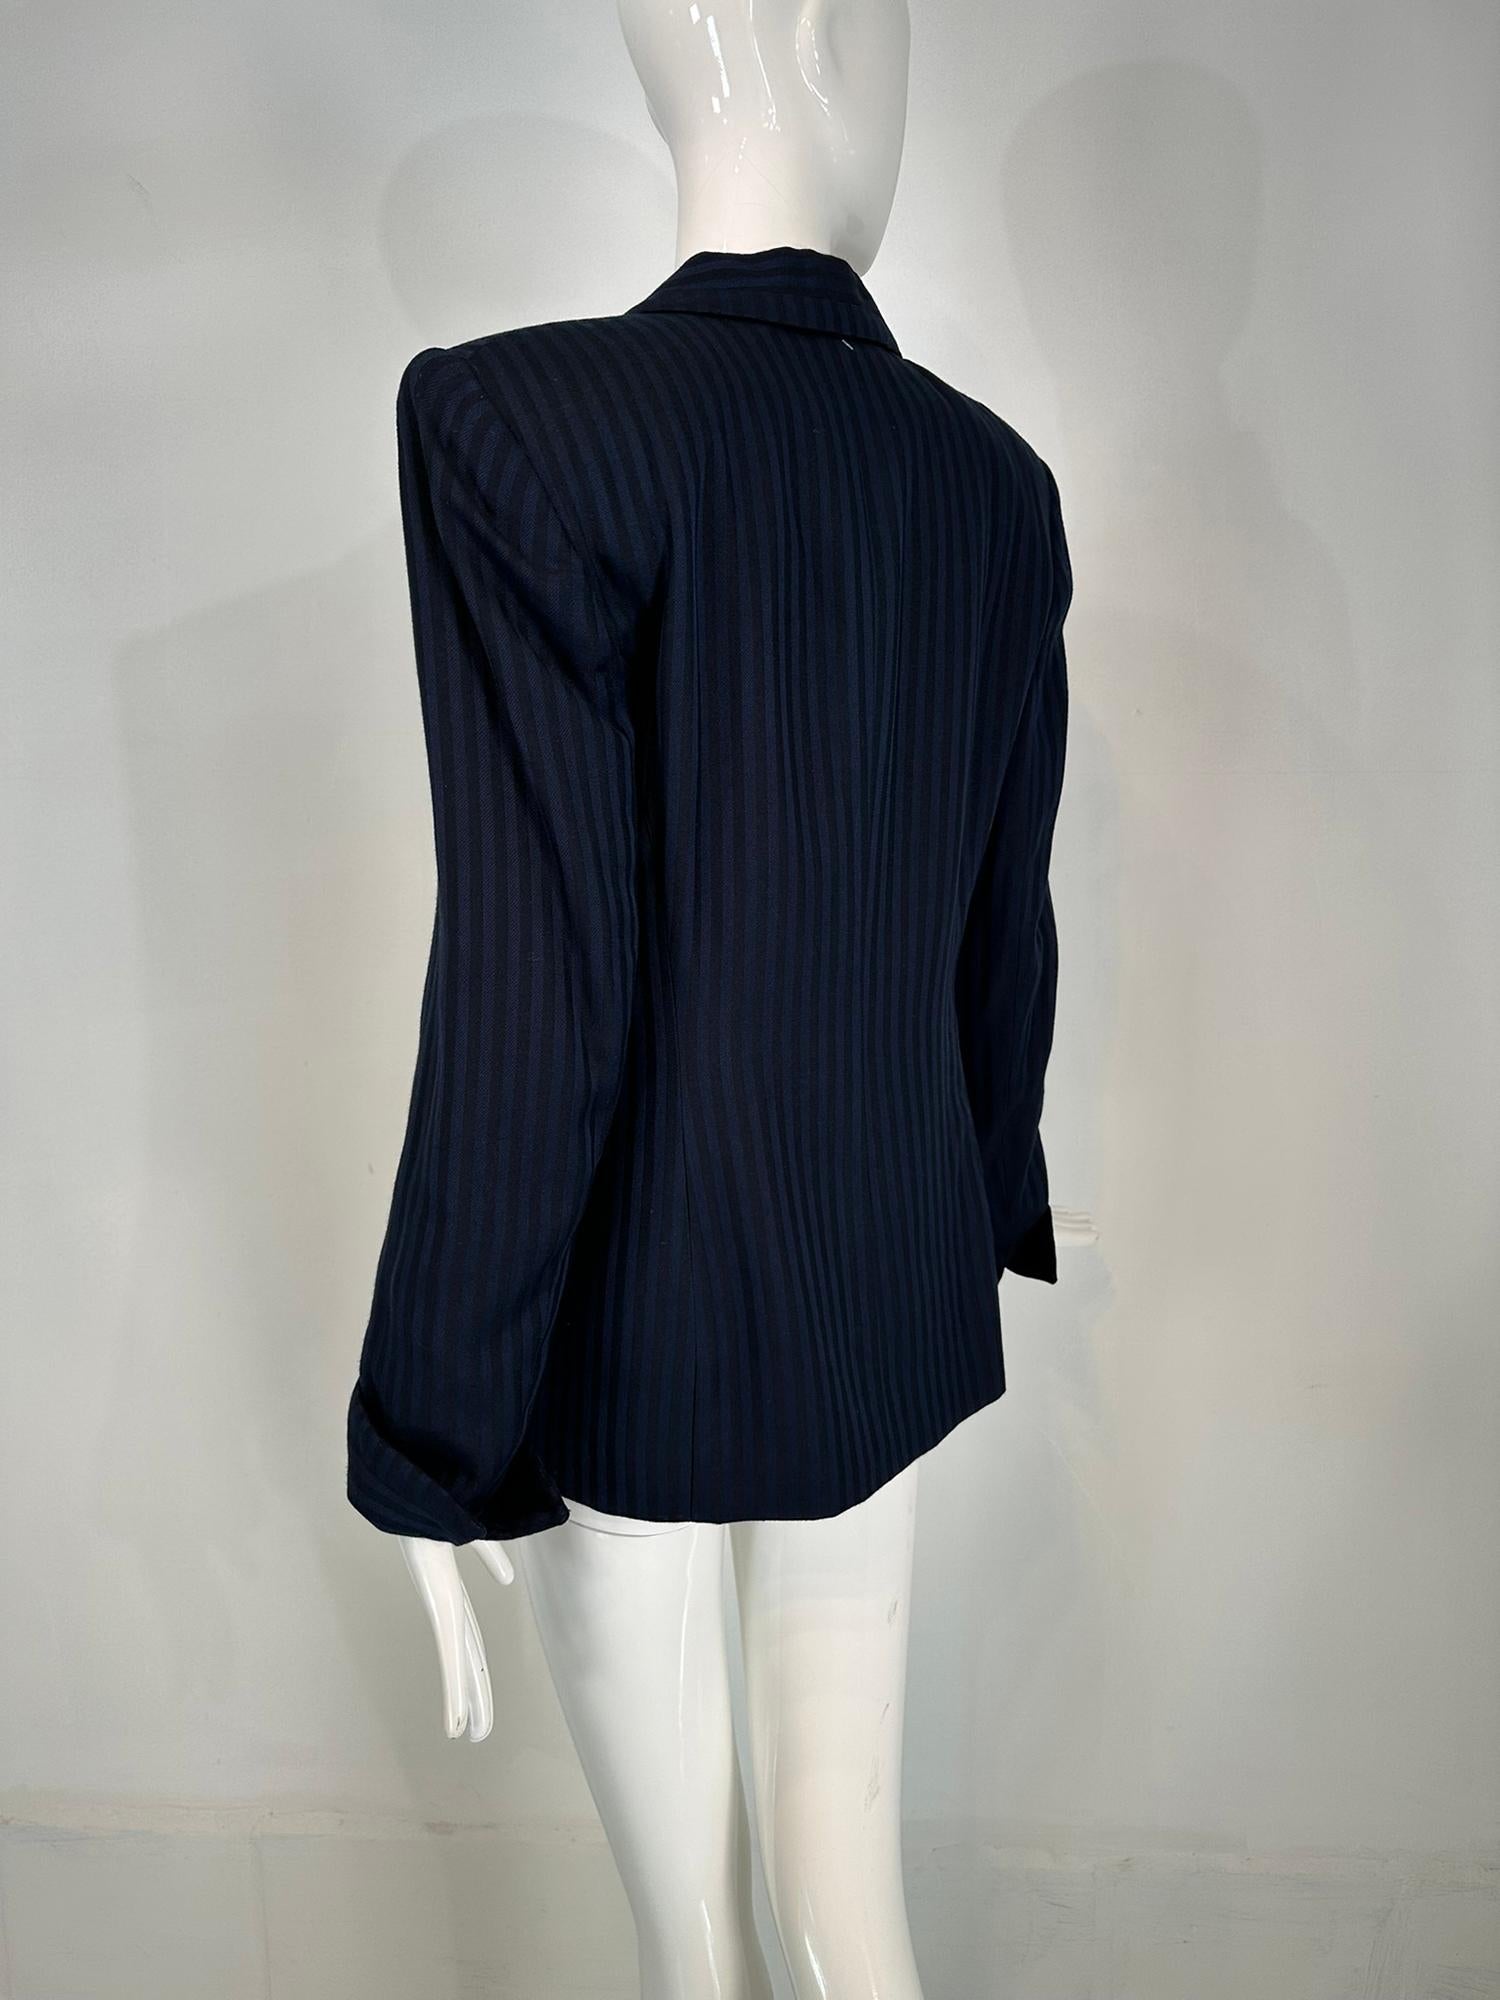 Christian Dior Navy Blue & Black Wide Stripe Wool Twill Jacket Late 90s-2000s 4 For Sale 5